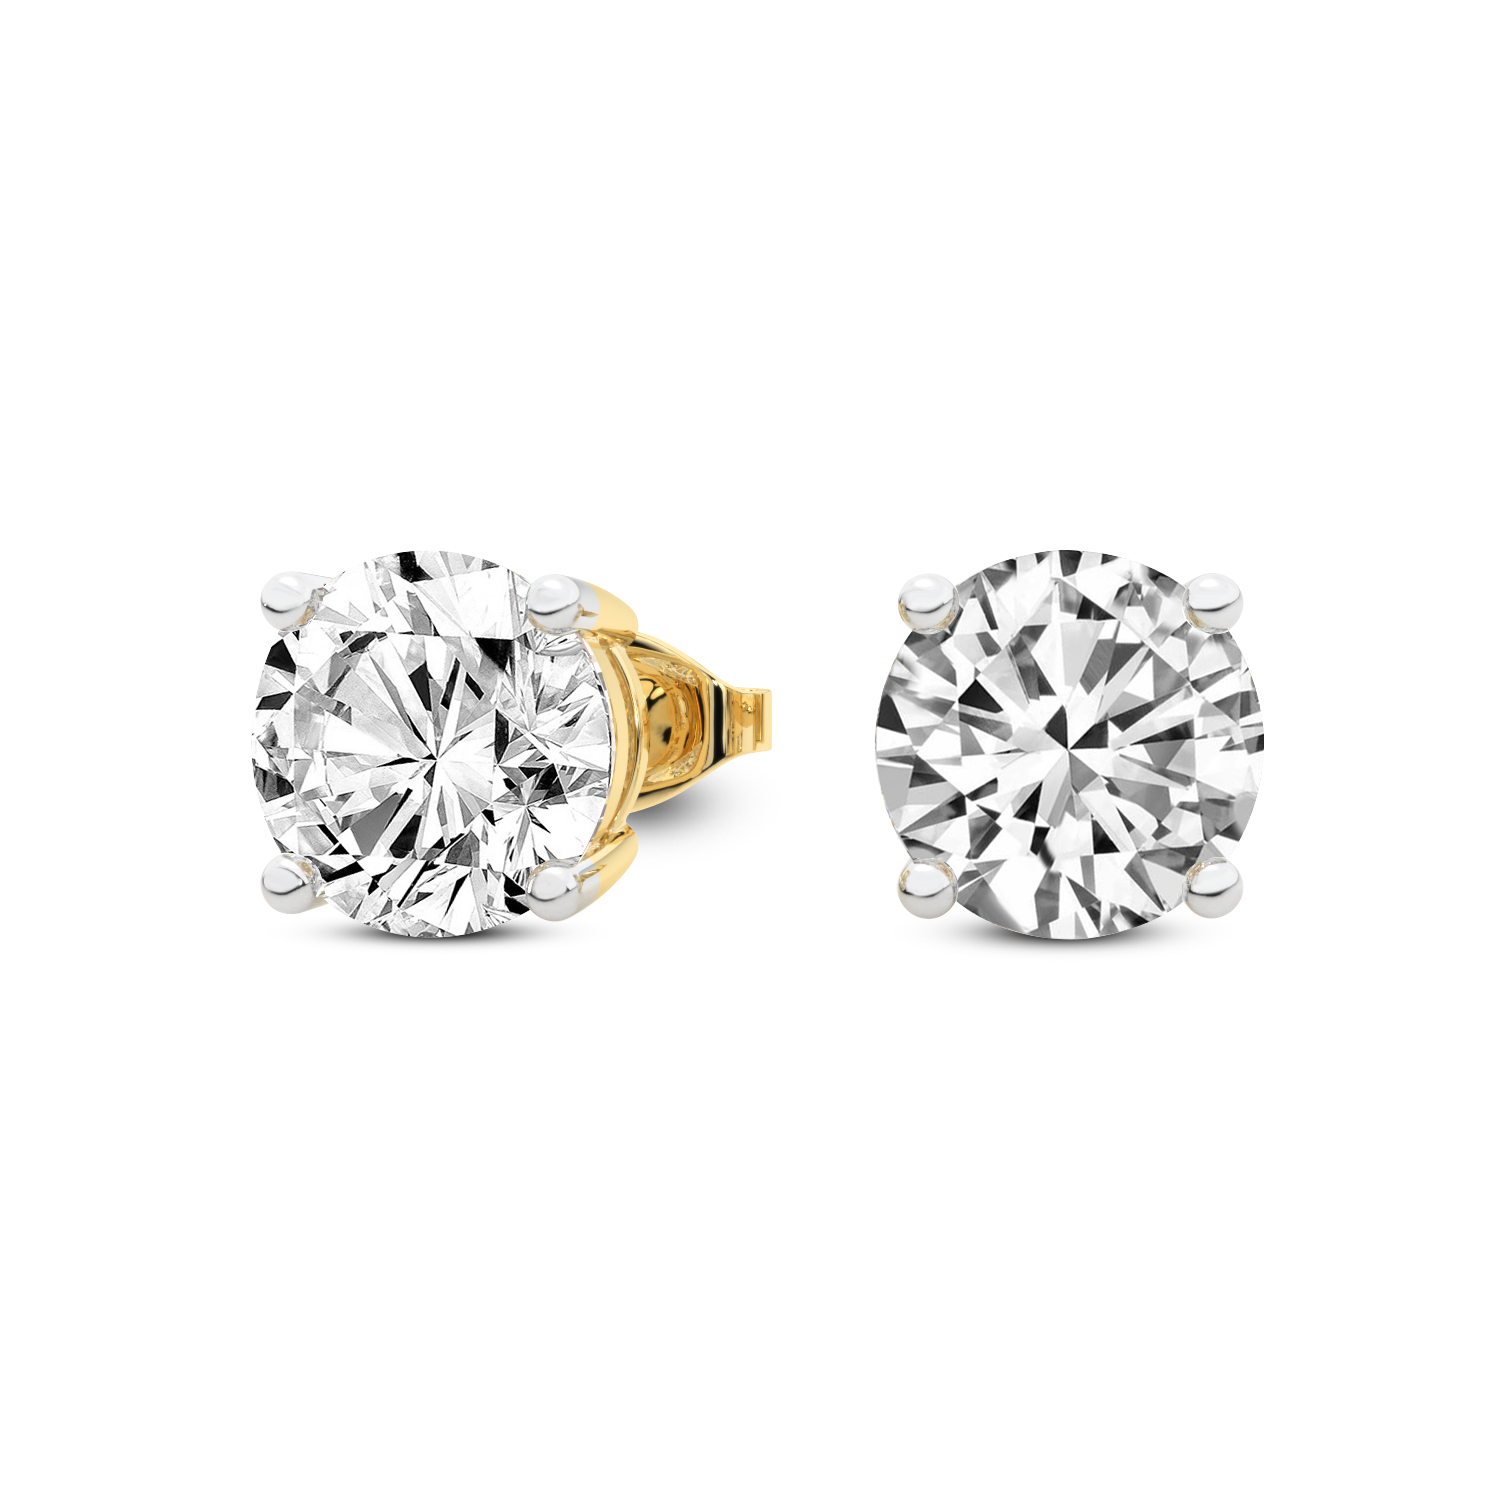 4 Prong Round Lab Diamond Stud Earrings yellow gold earring, small right view